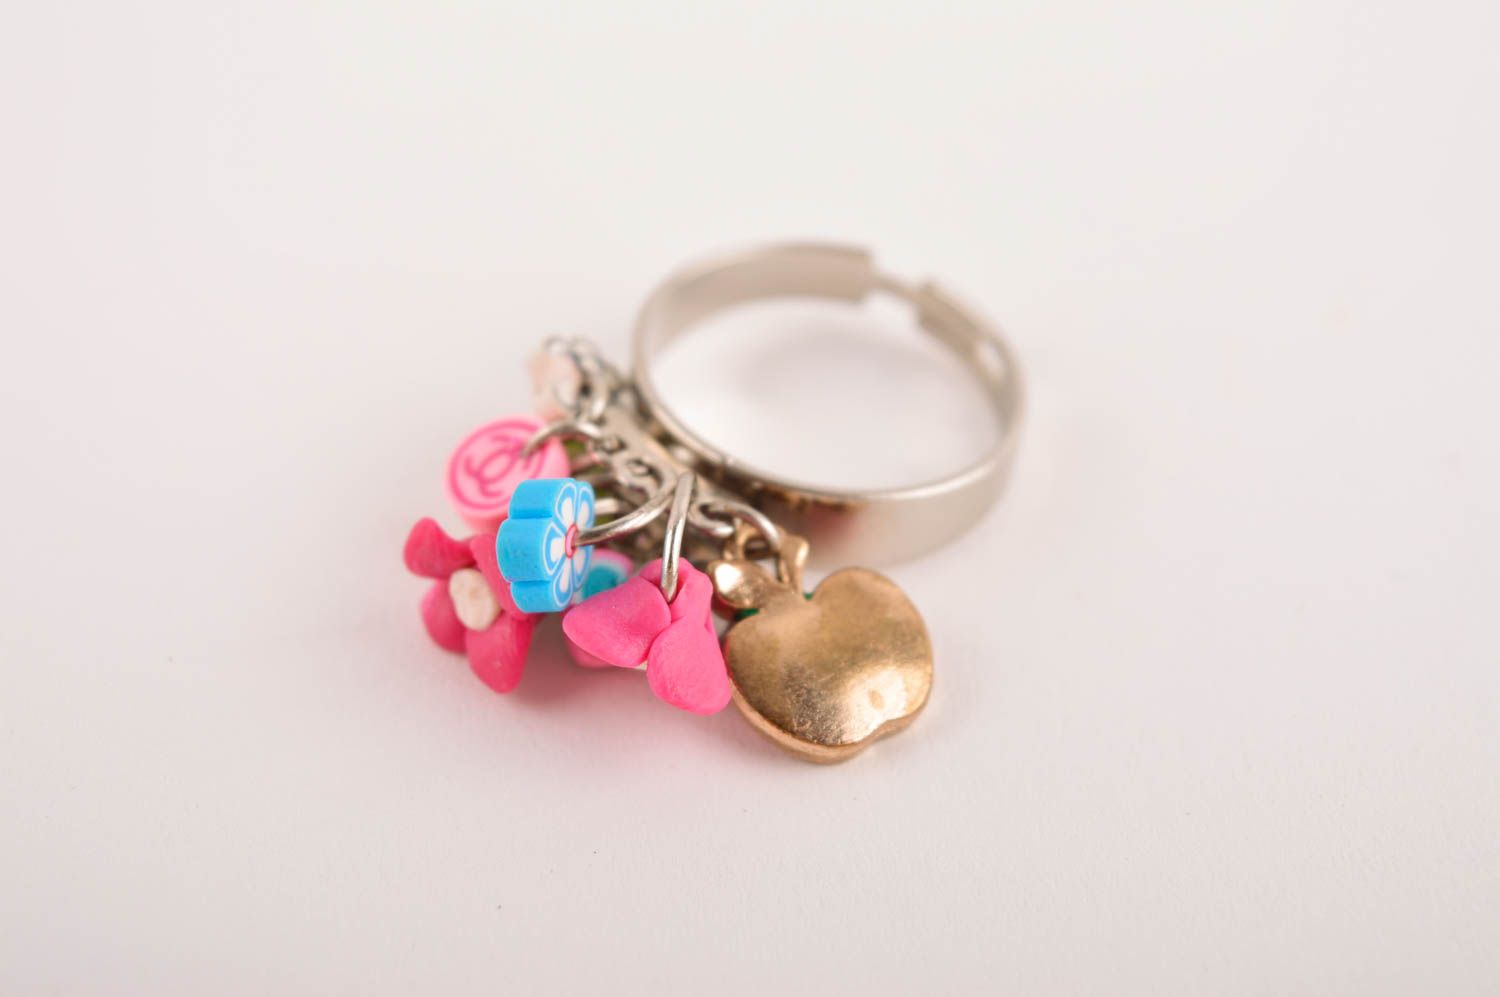 Handmade clay ring designer ring for women unusual accessory gift ideas photo 2